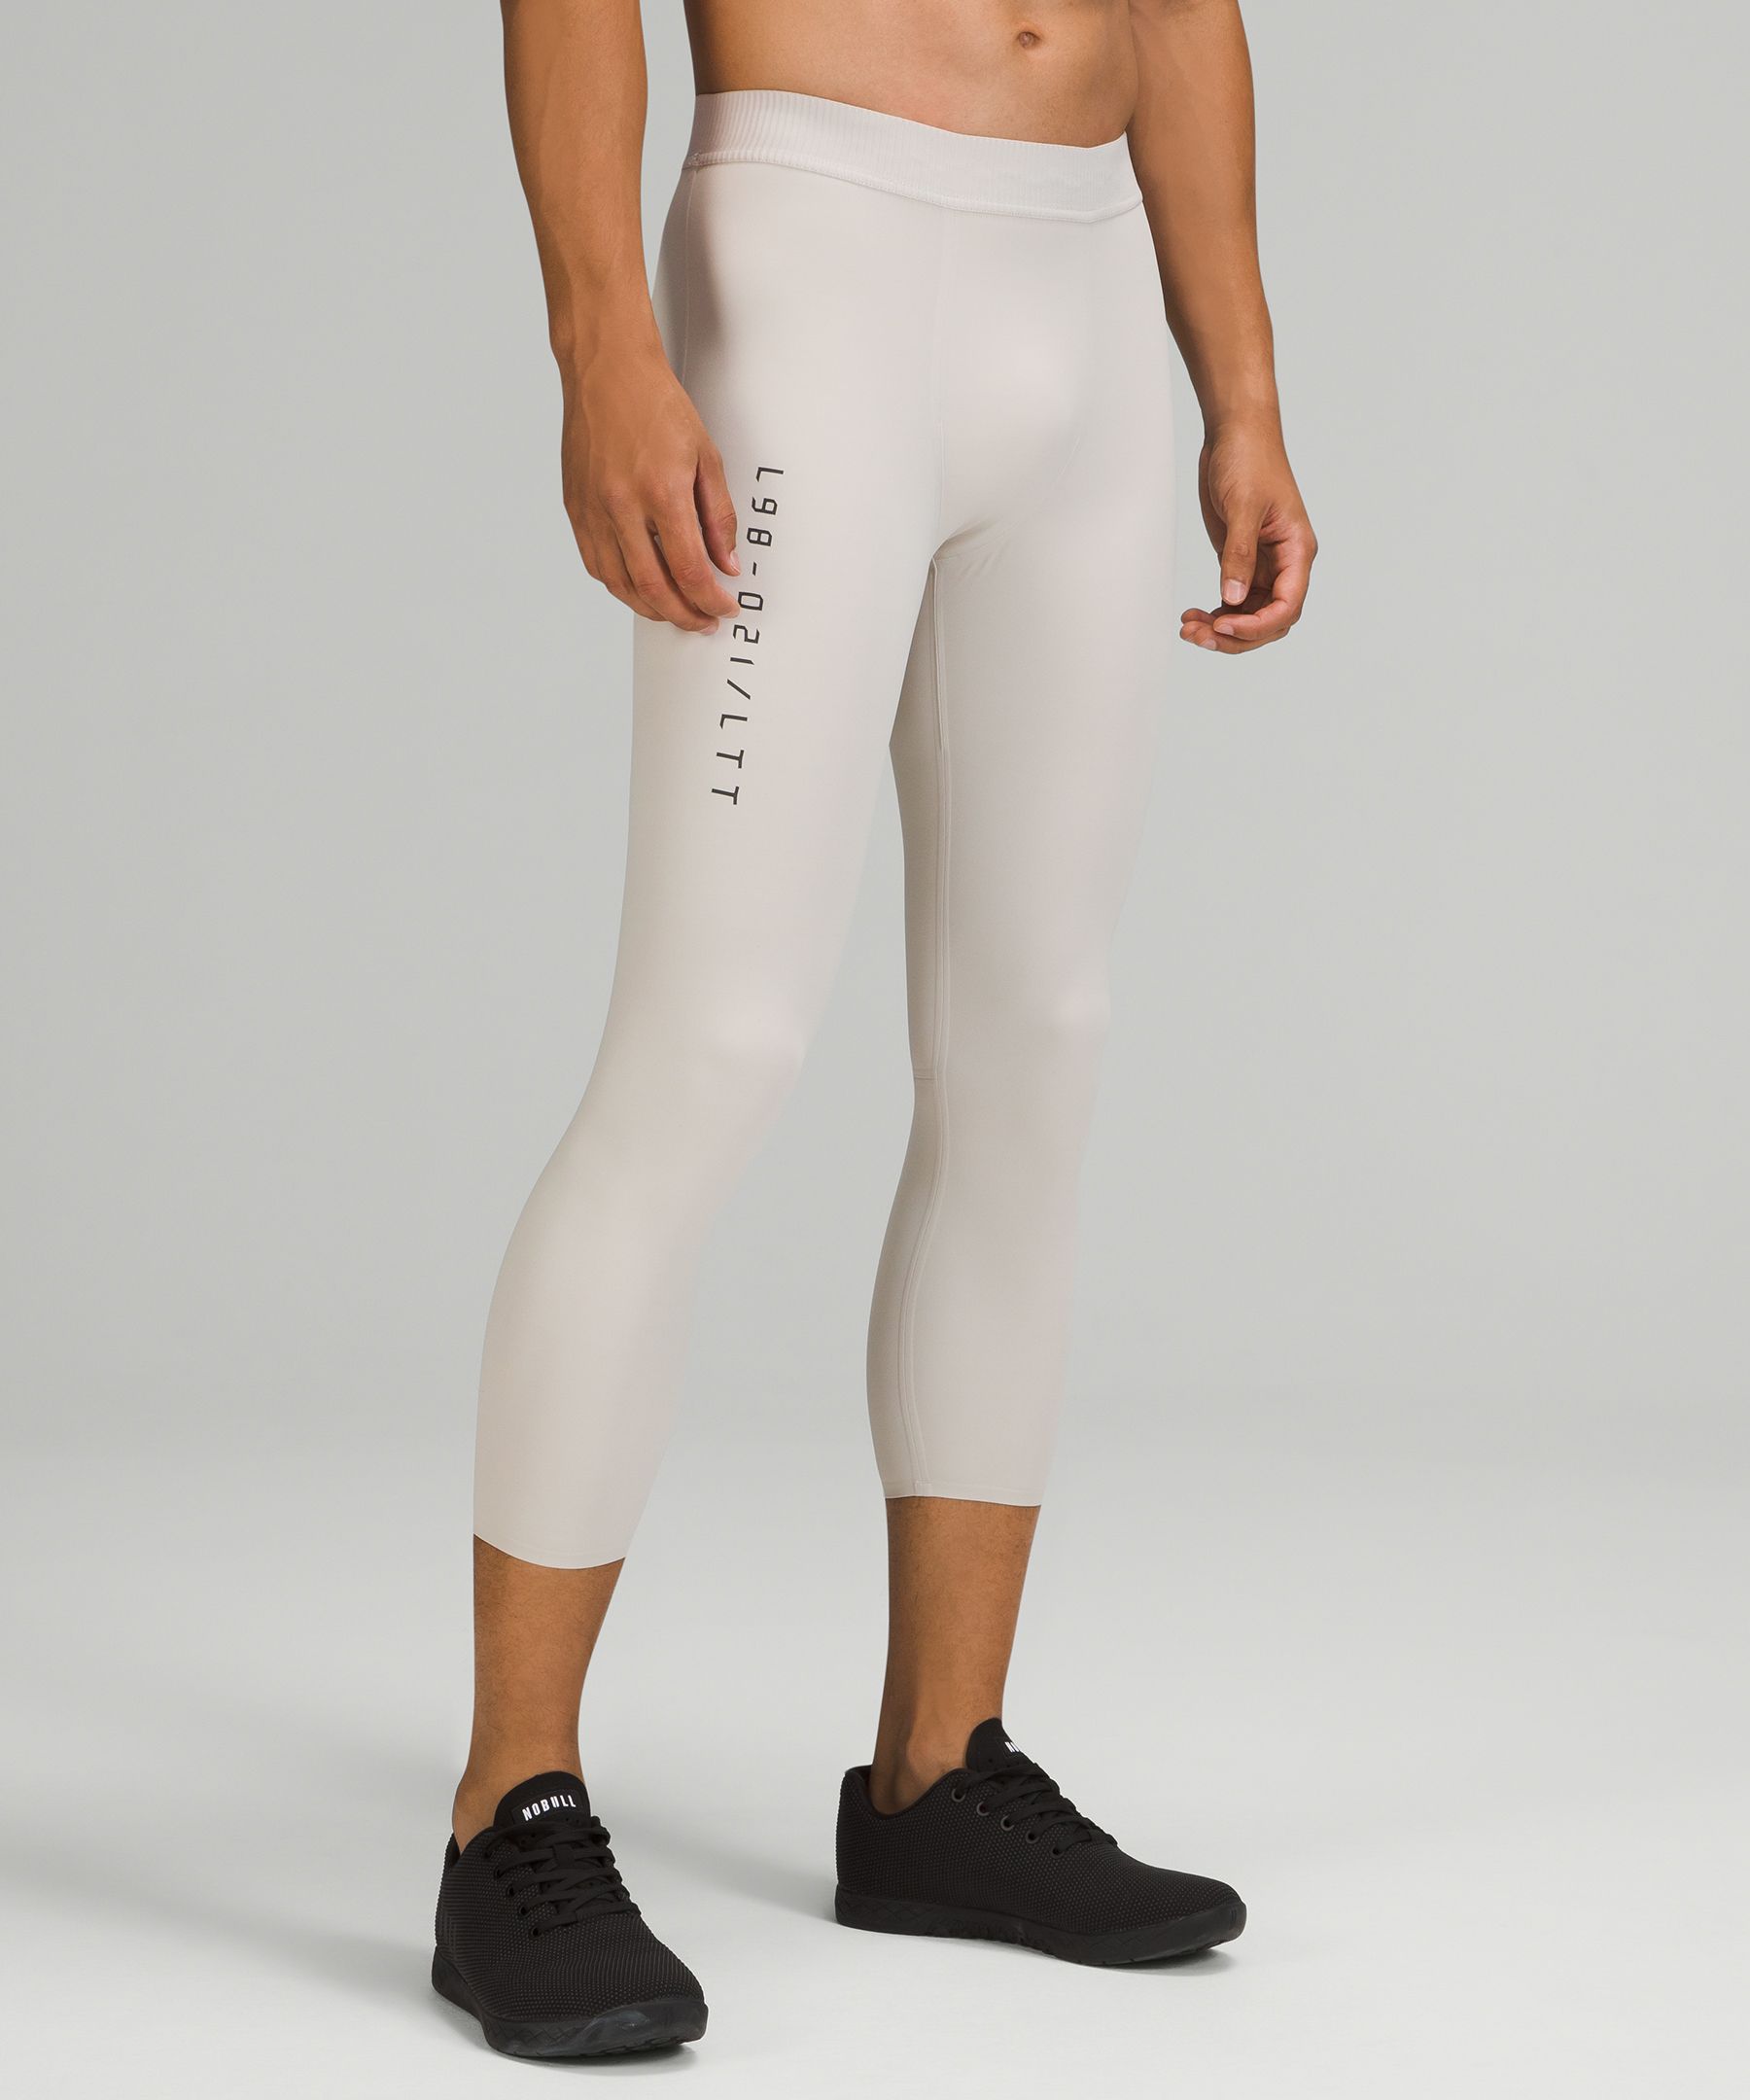 Lululemon License To Train Tights 21" In Dove Grey